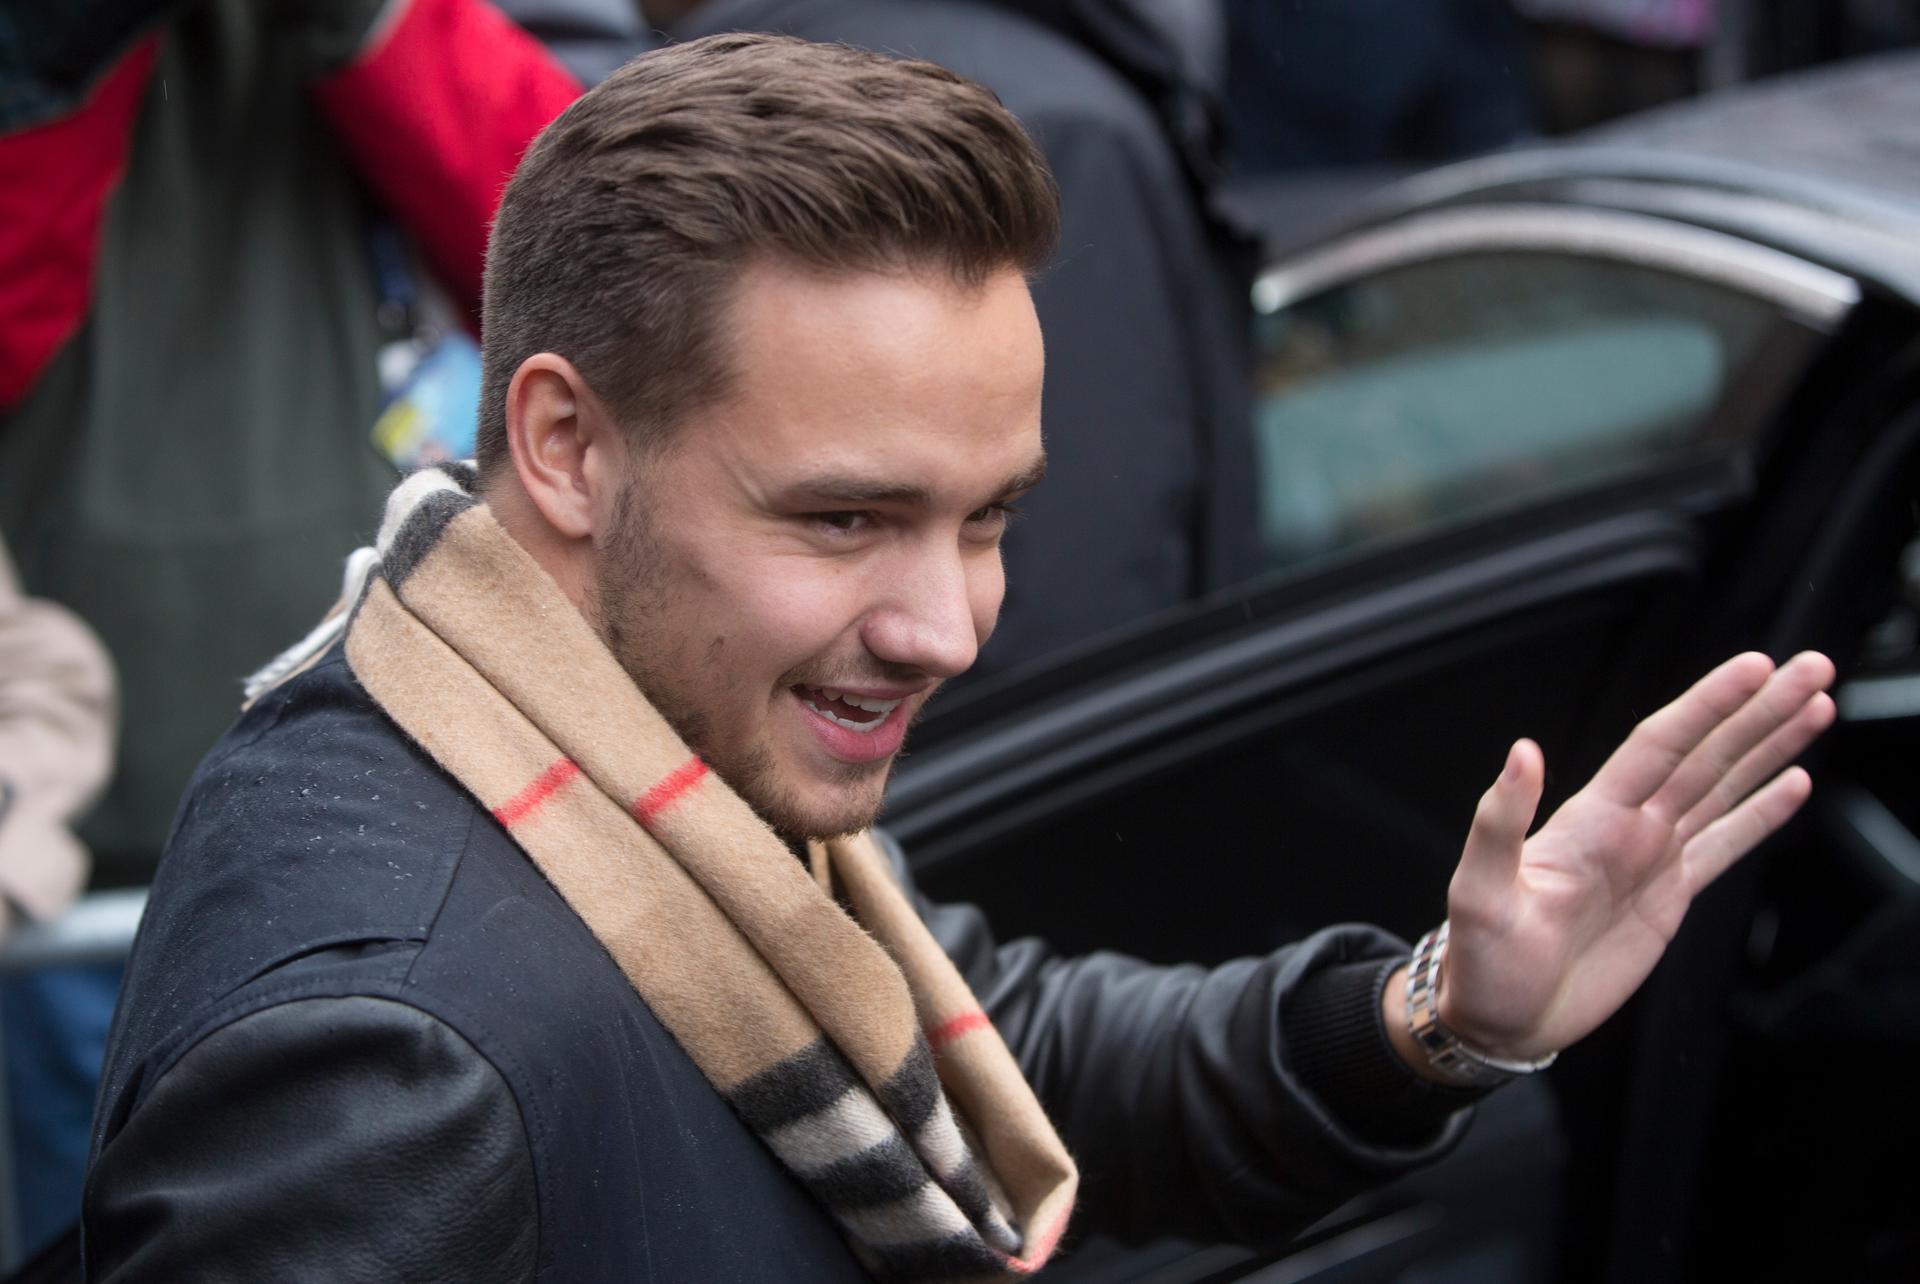 Liam Payne, singer with British boy band One Direction, leaves the recording of the Band Aid 30 charity single in London on November 15, 2014.